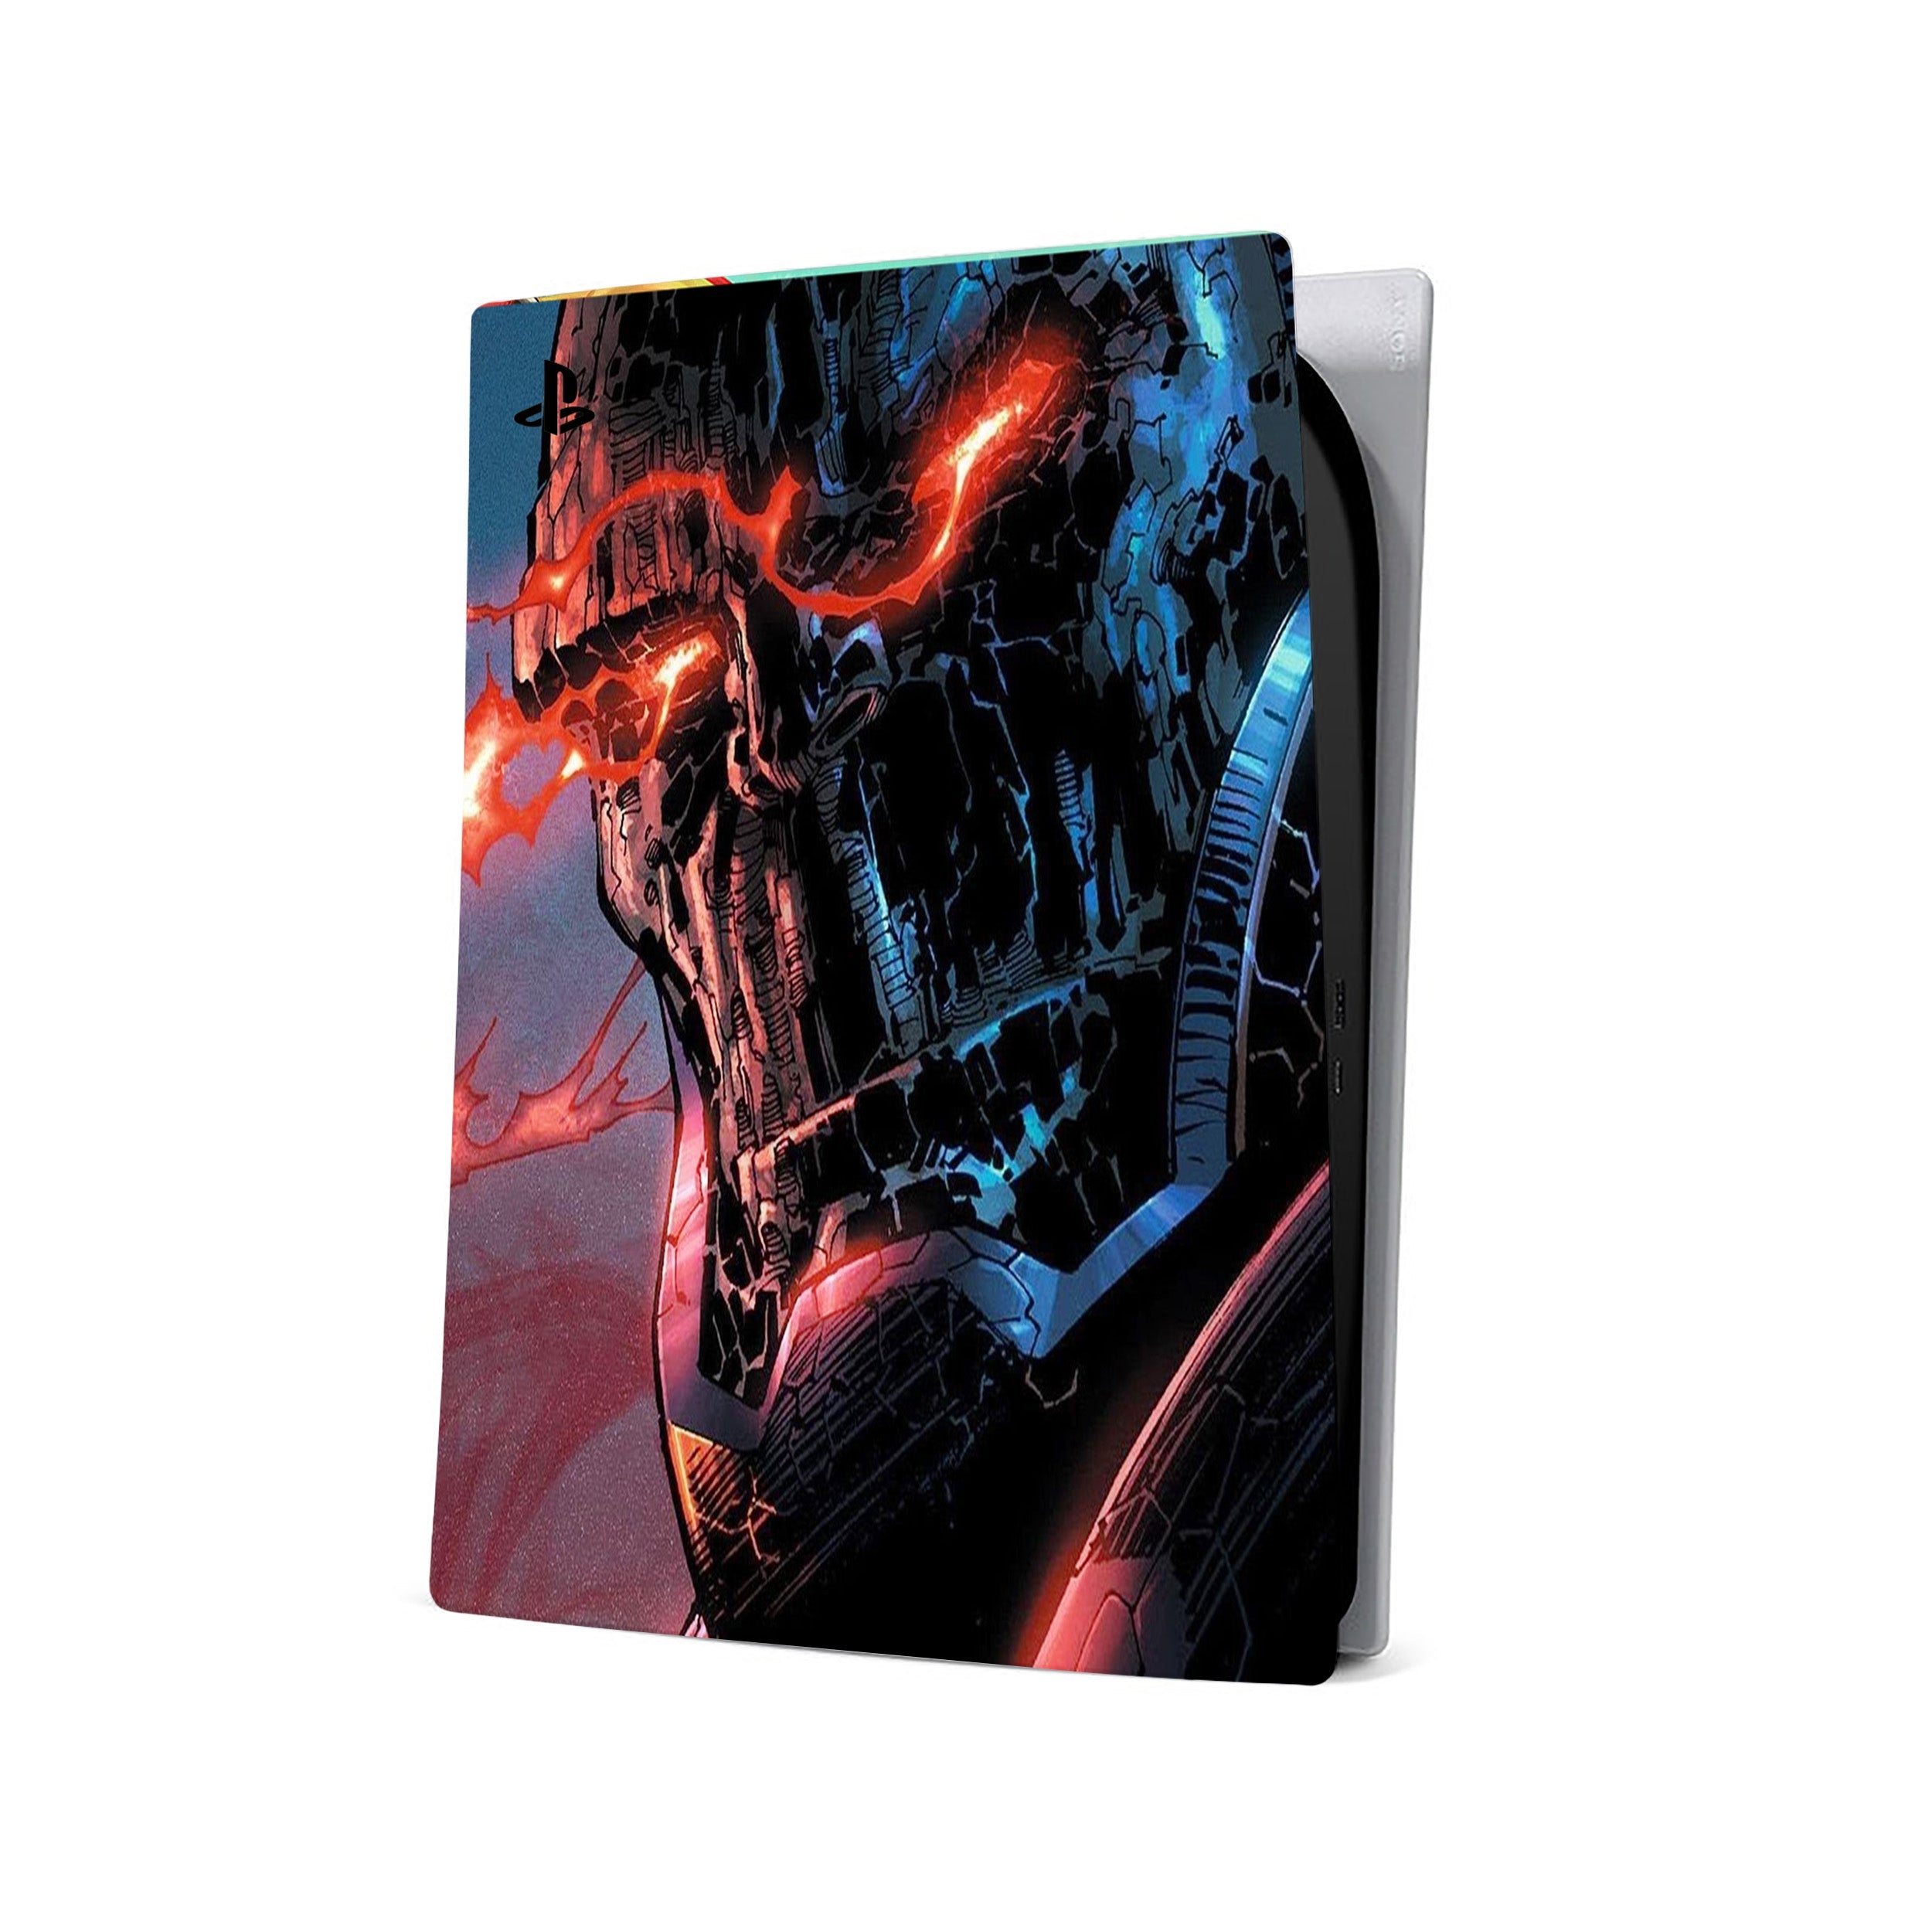 A video game skin featuring a DC Darkseid design for the PS5.